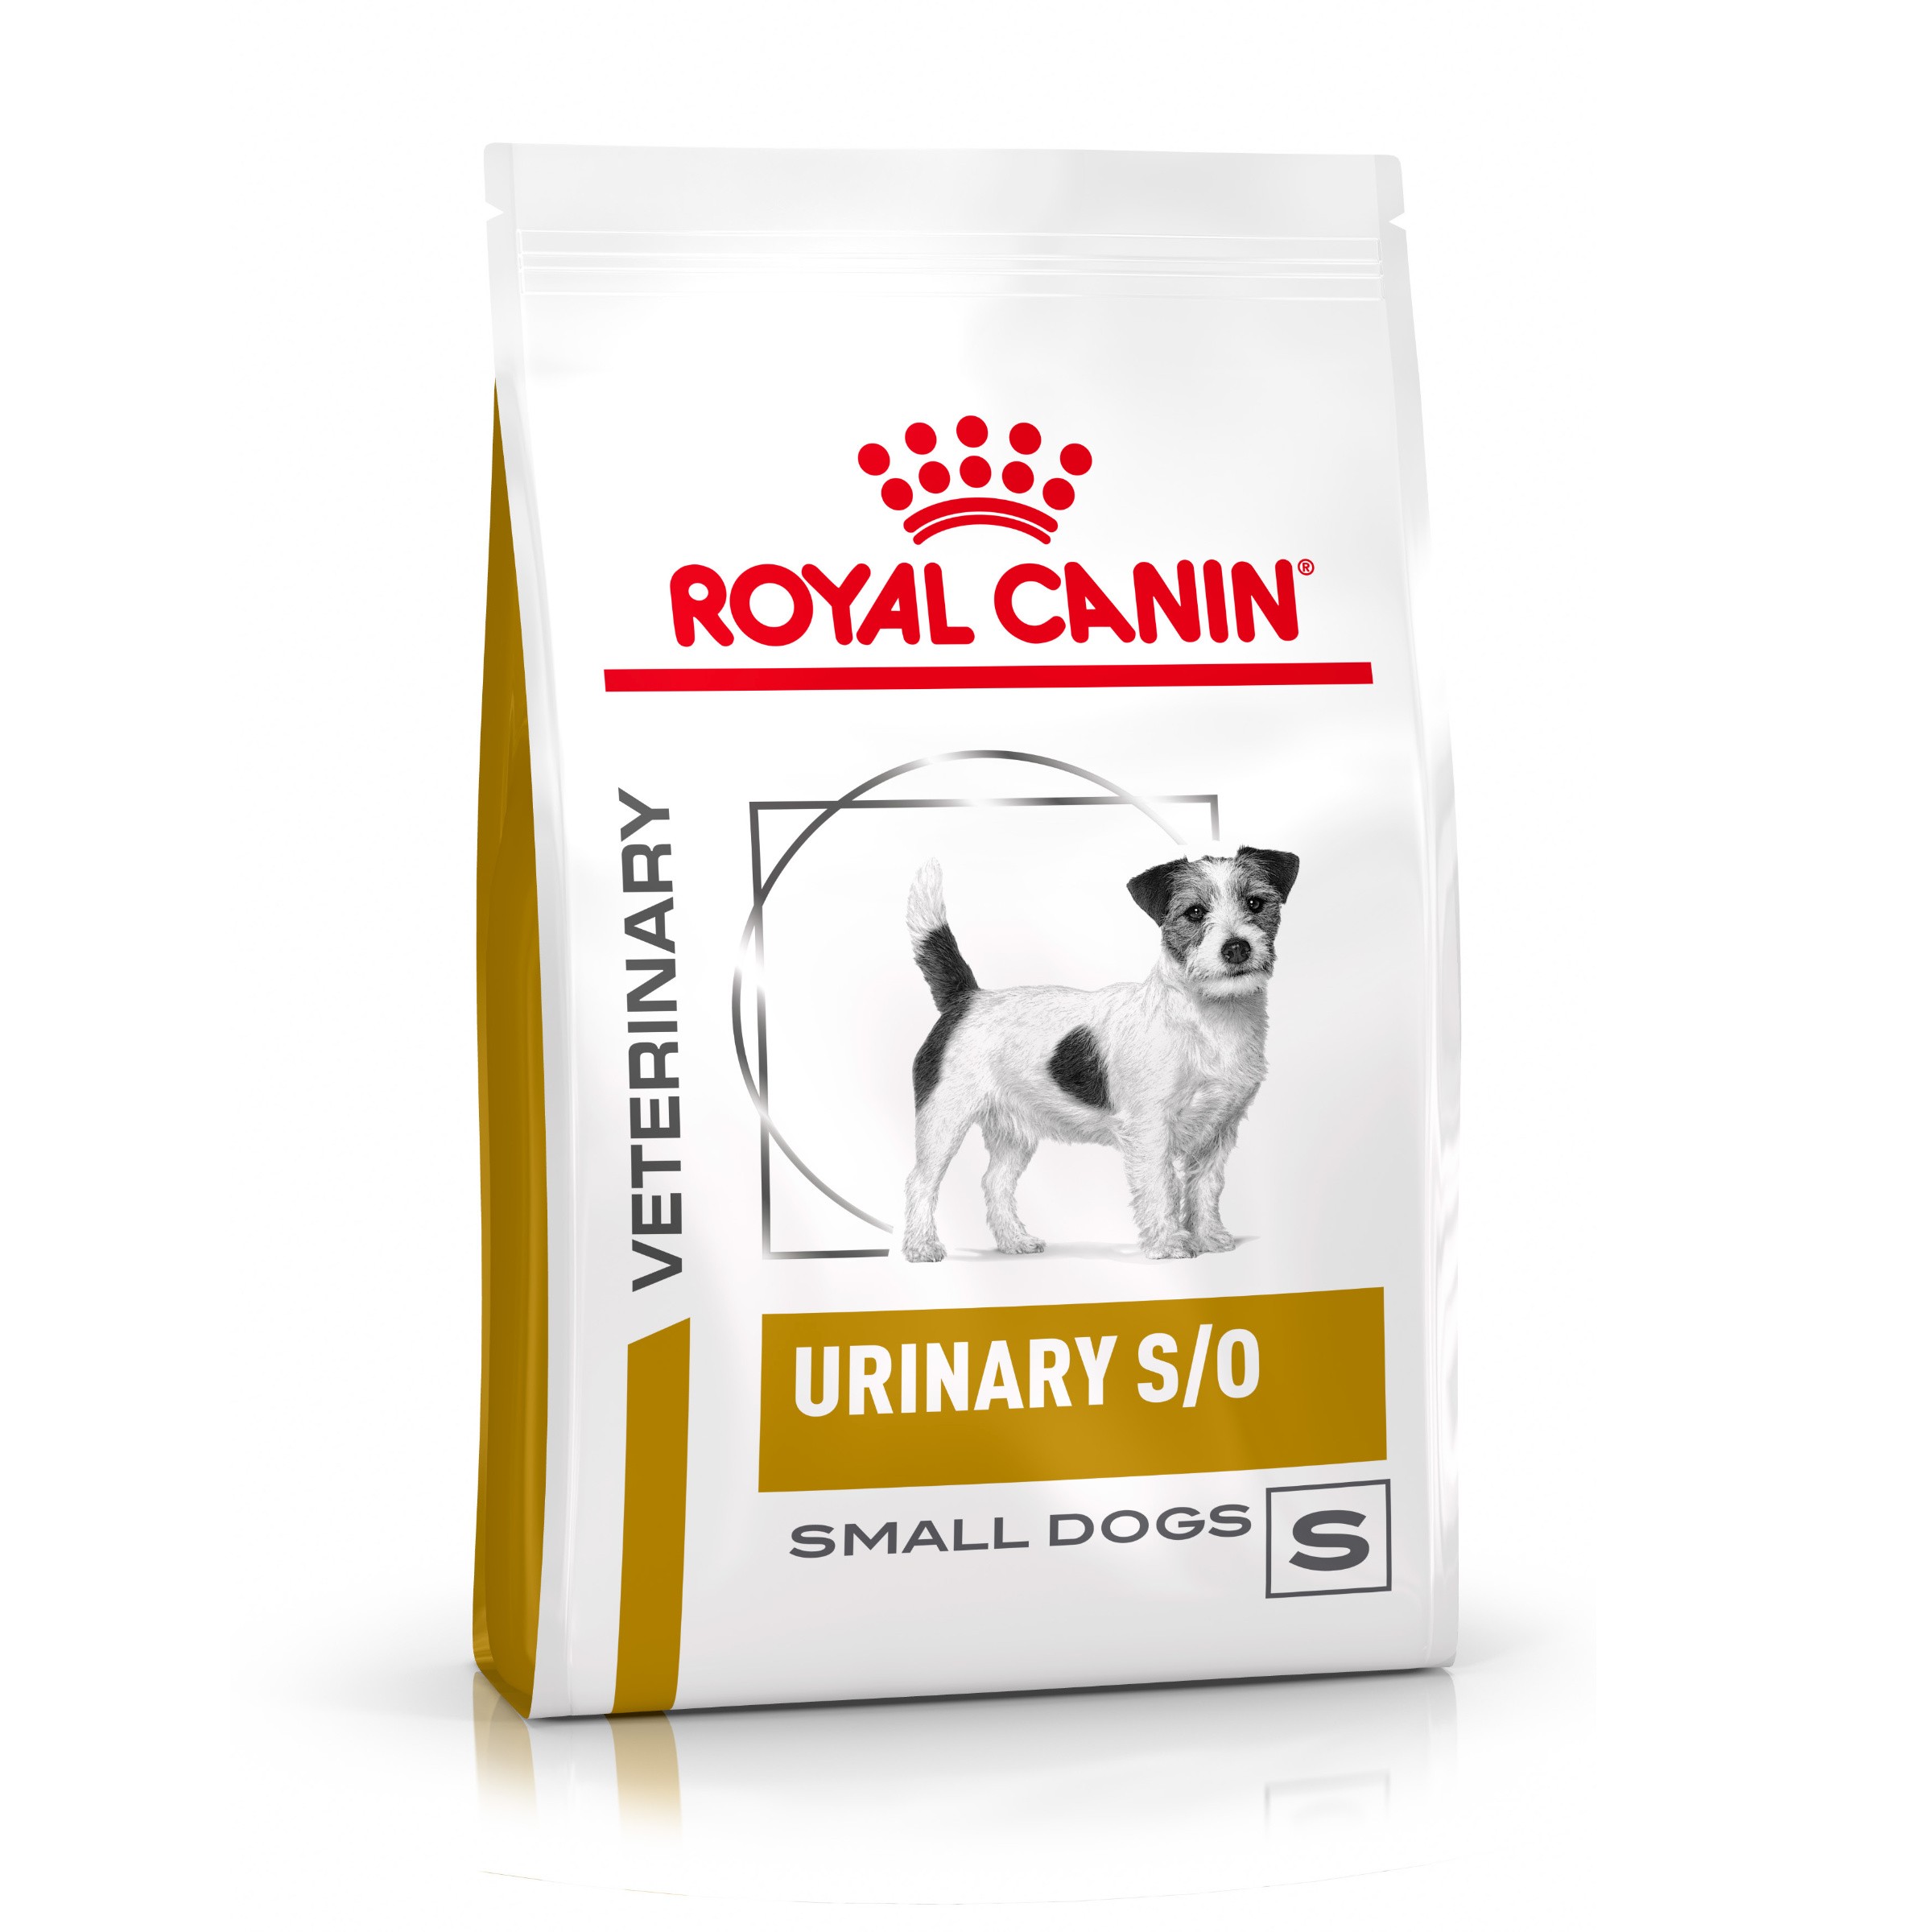 Royal Canin Veterinary Urinary S/O pour chien petit